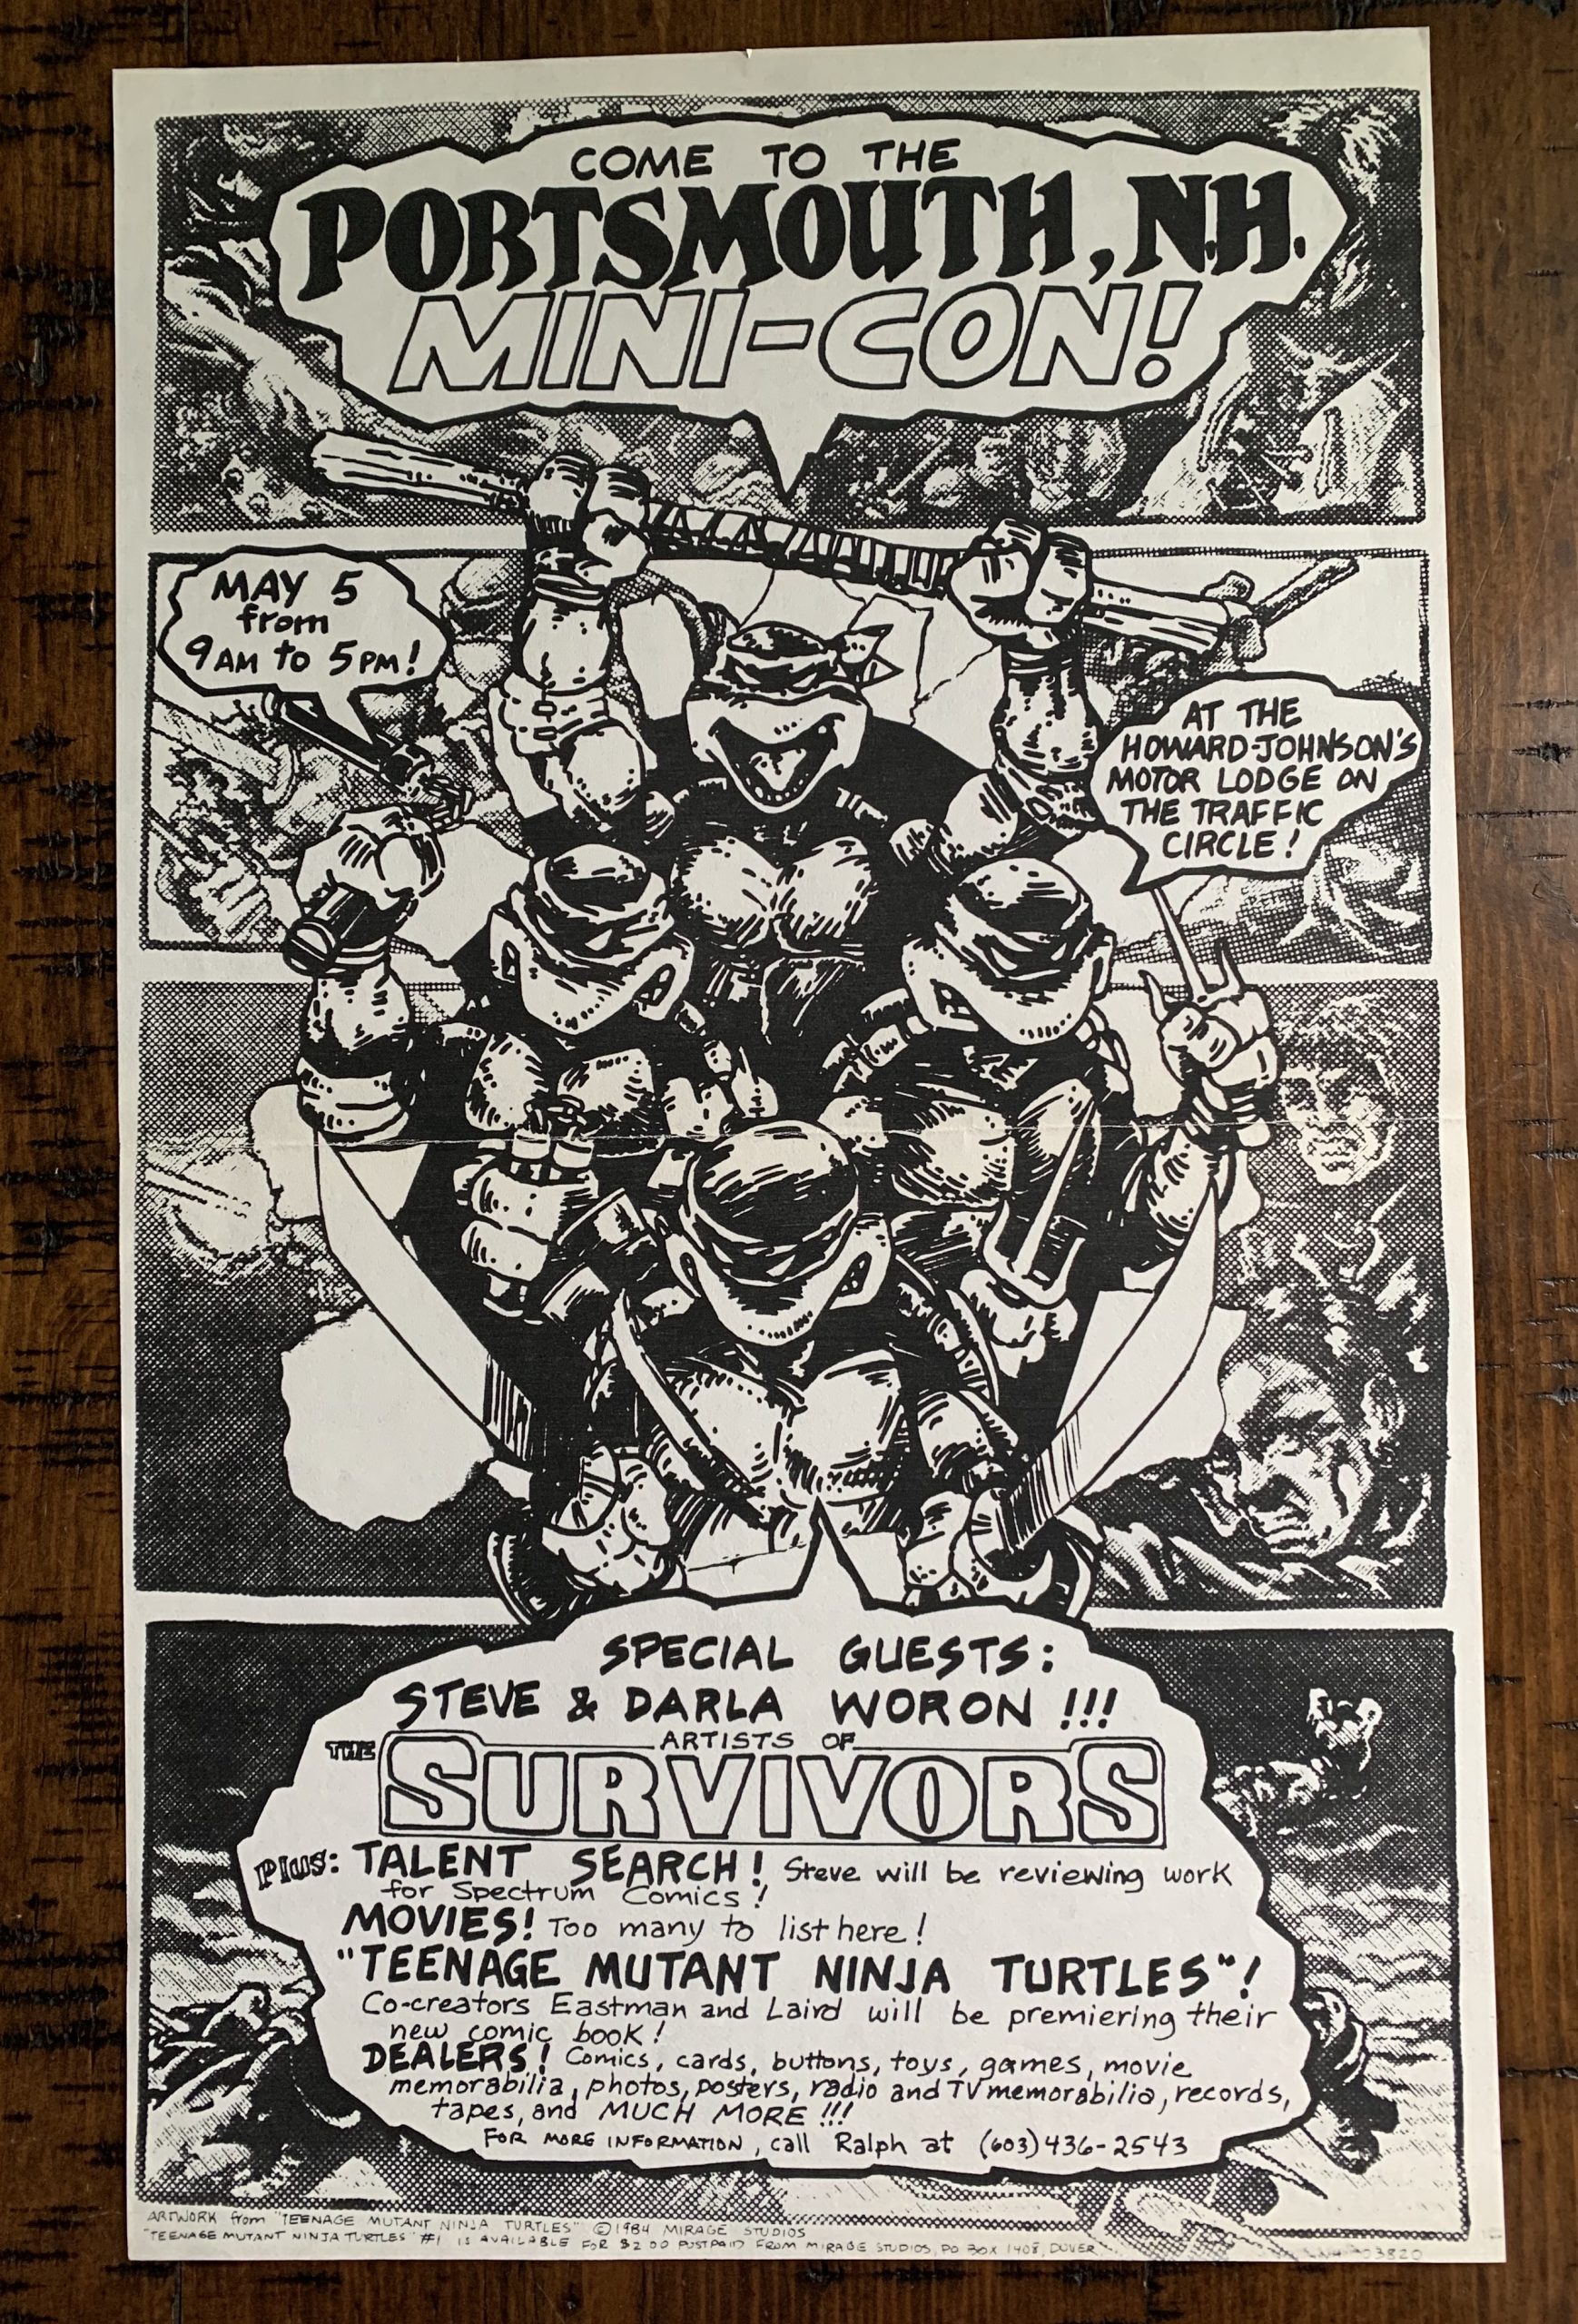 Radical TMNT Auctions hosted on the Eastman Studios website